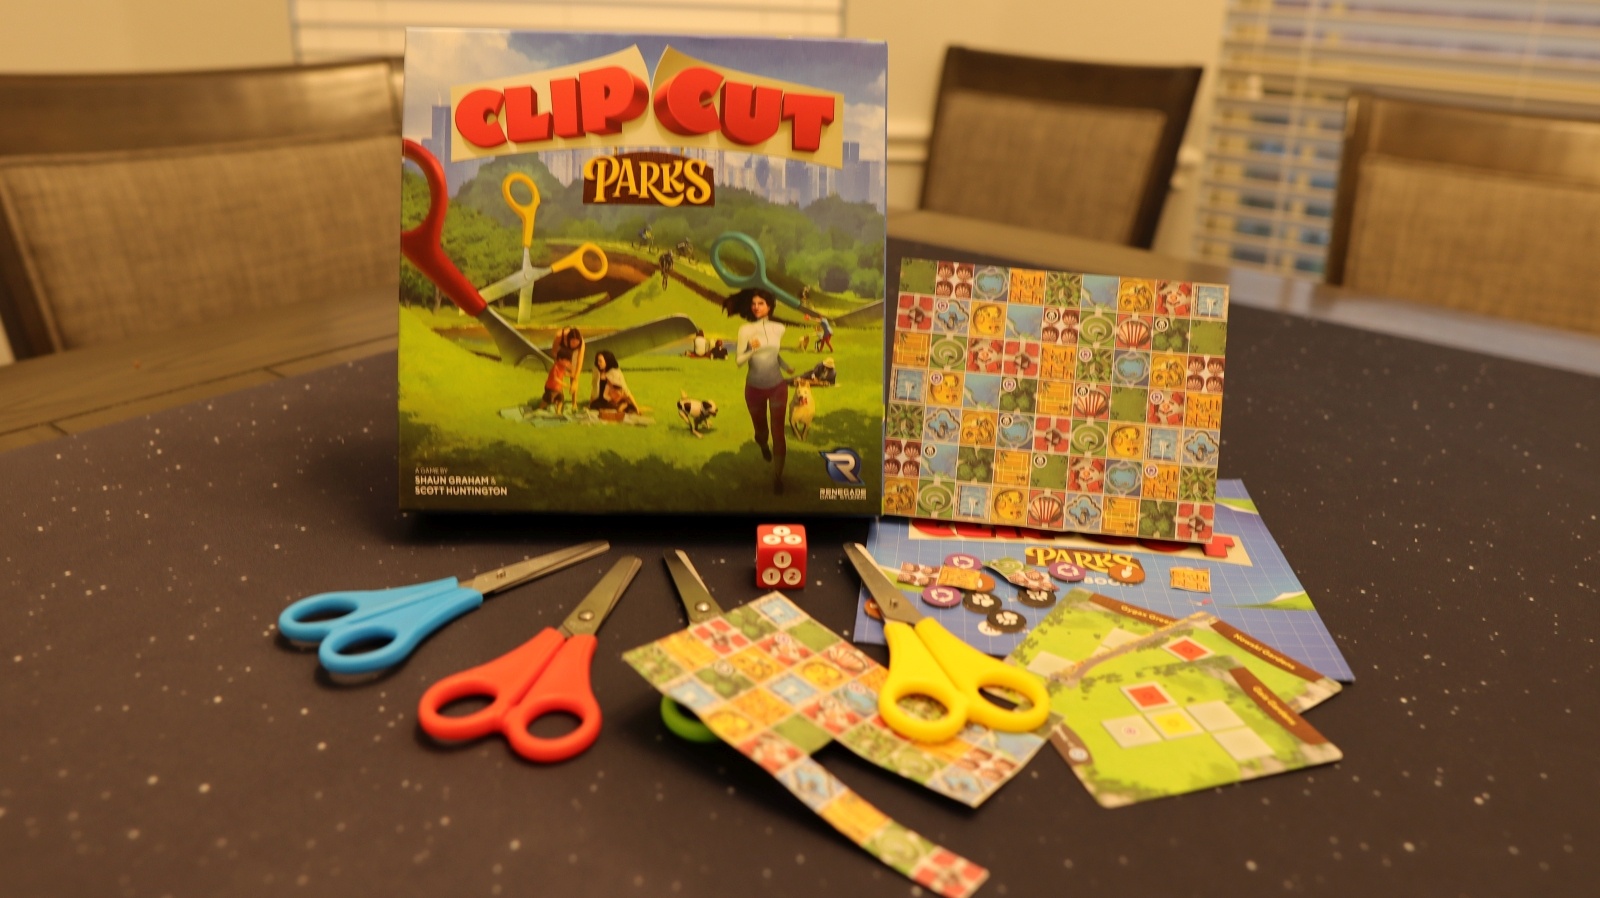 The World's First Roll 'n Cut Game --- ClipCut Parks Review